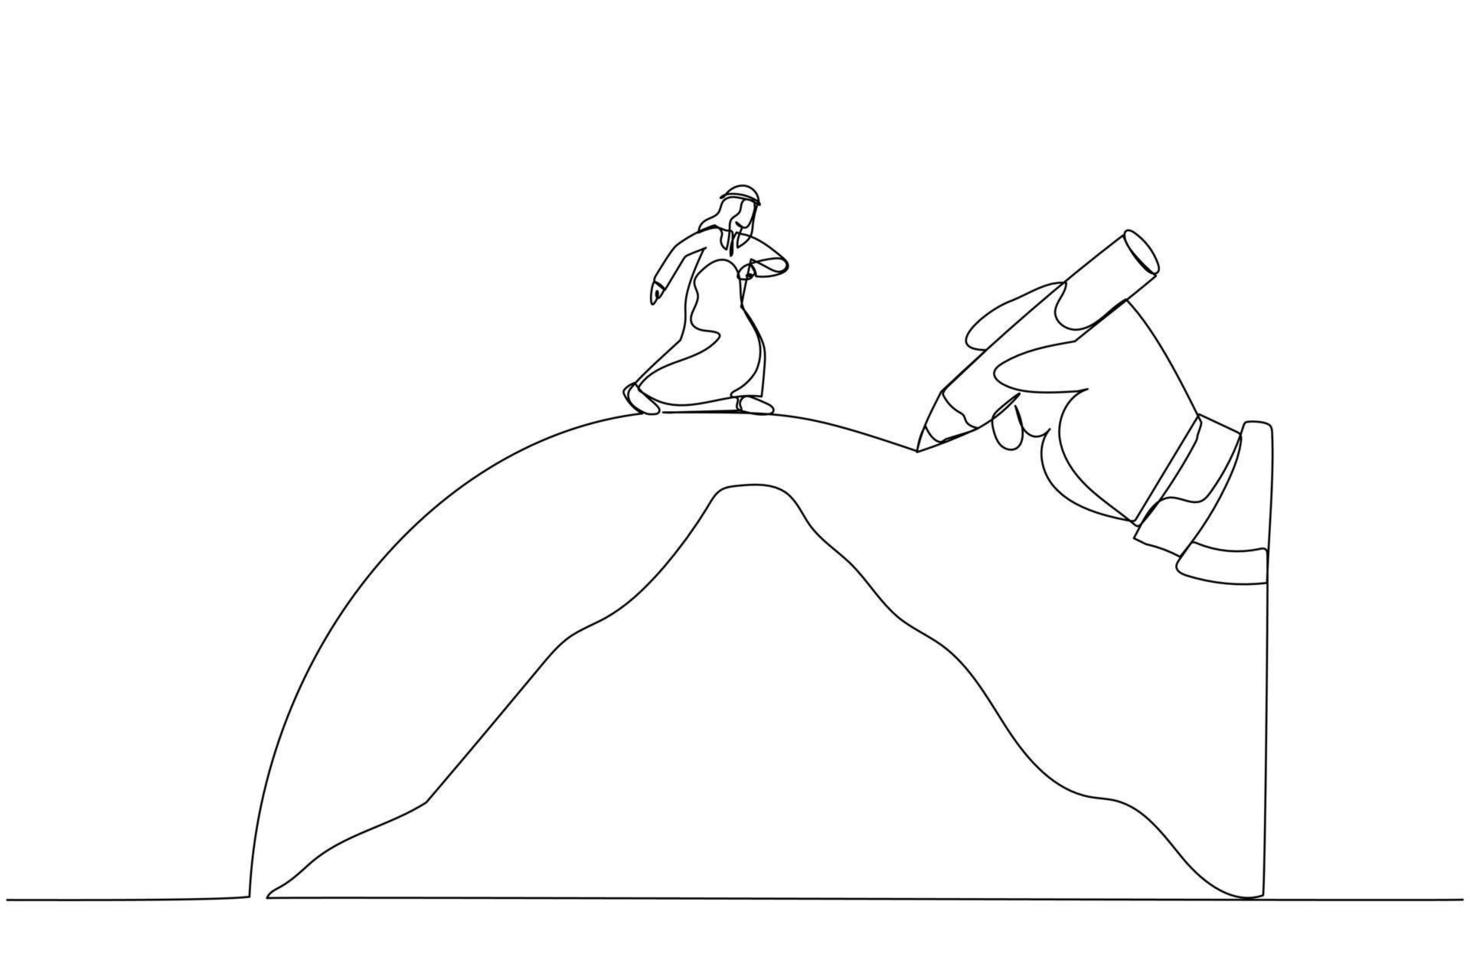 Drawing of giant hand draws a path to help the arab businessman cross the mountains, metaphor for conquering adversity. One line style art vector